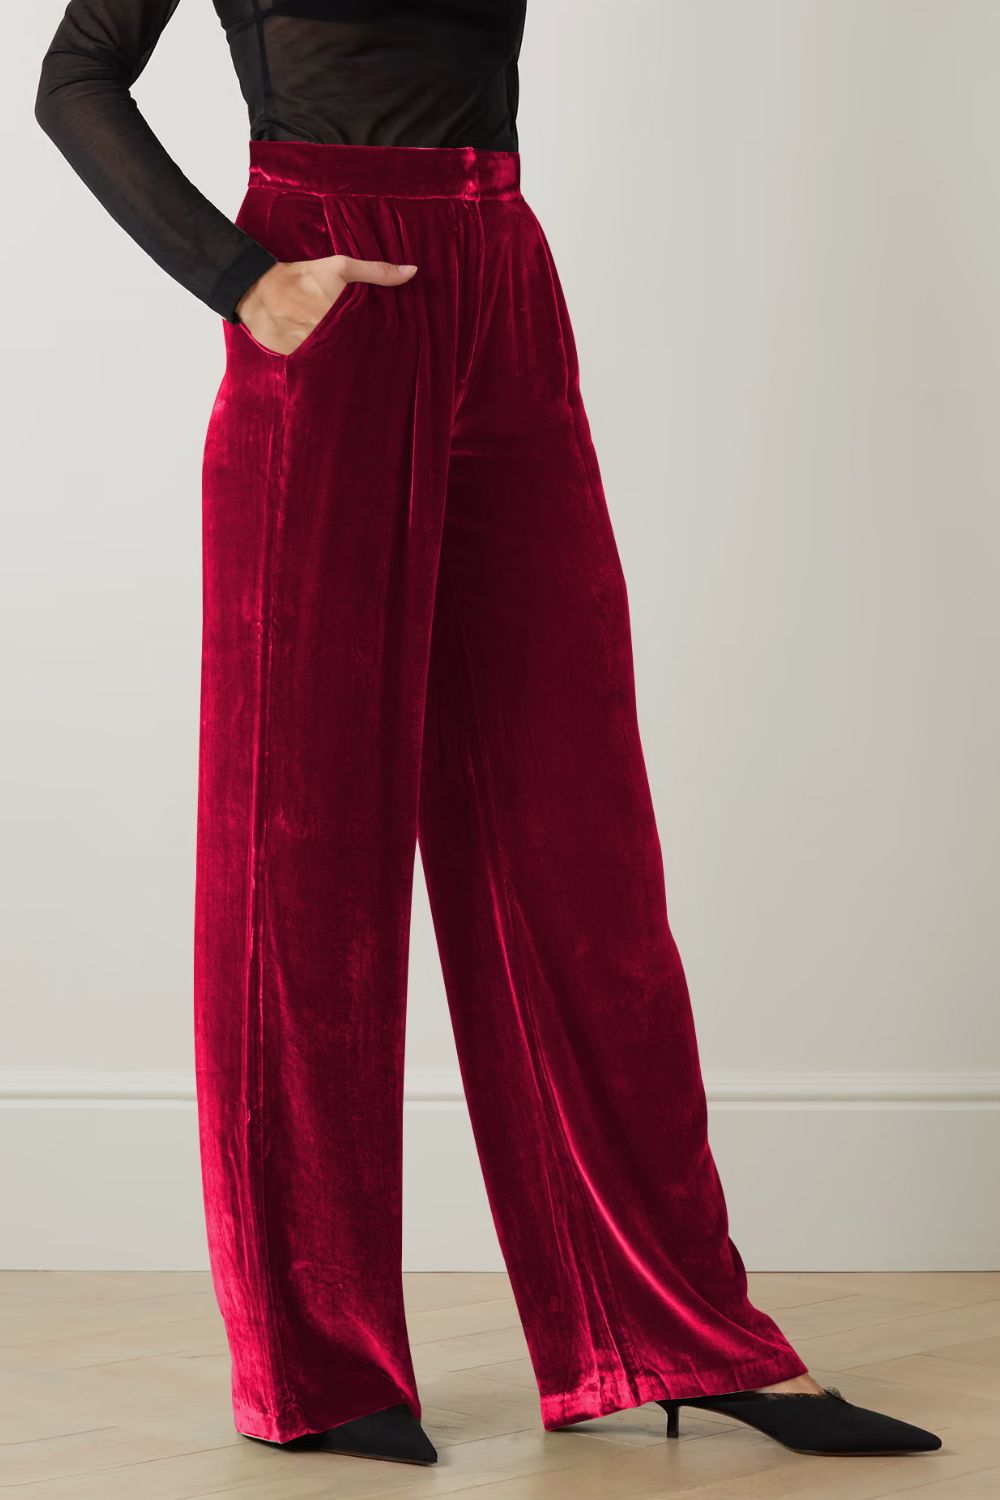 Loose Fit High Waist Long Pants with Pockets - Bottoms - Pants - 16 - 2024